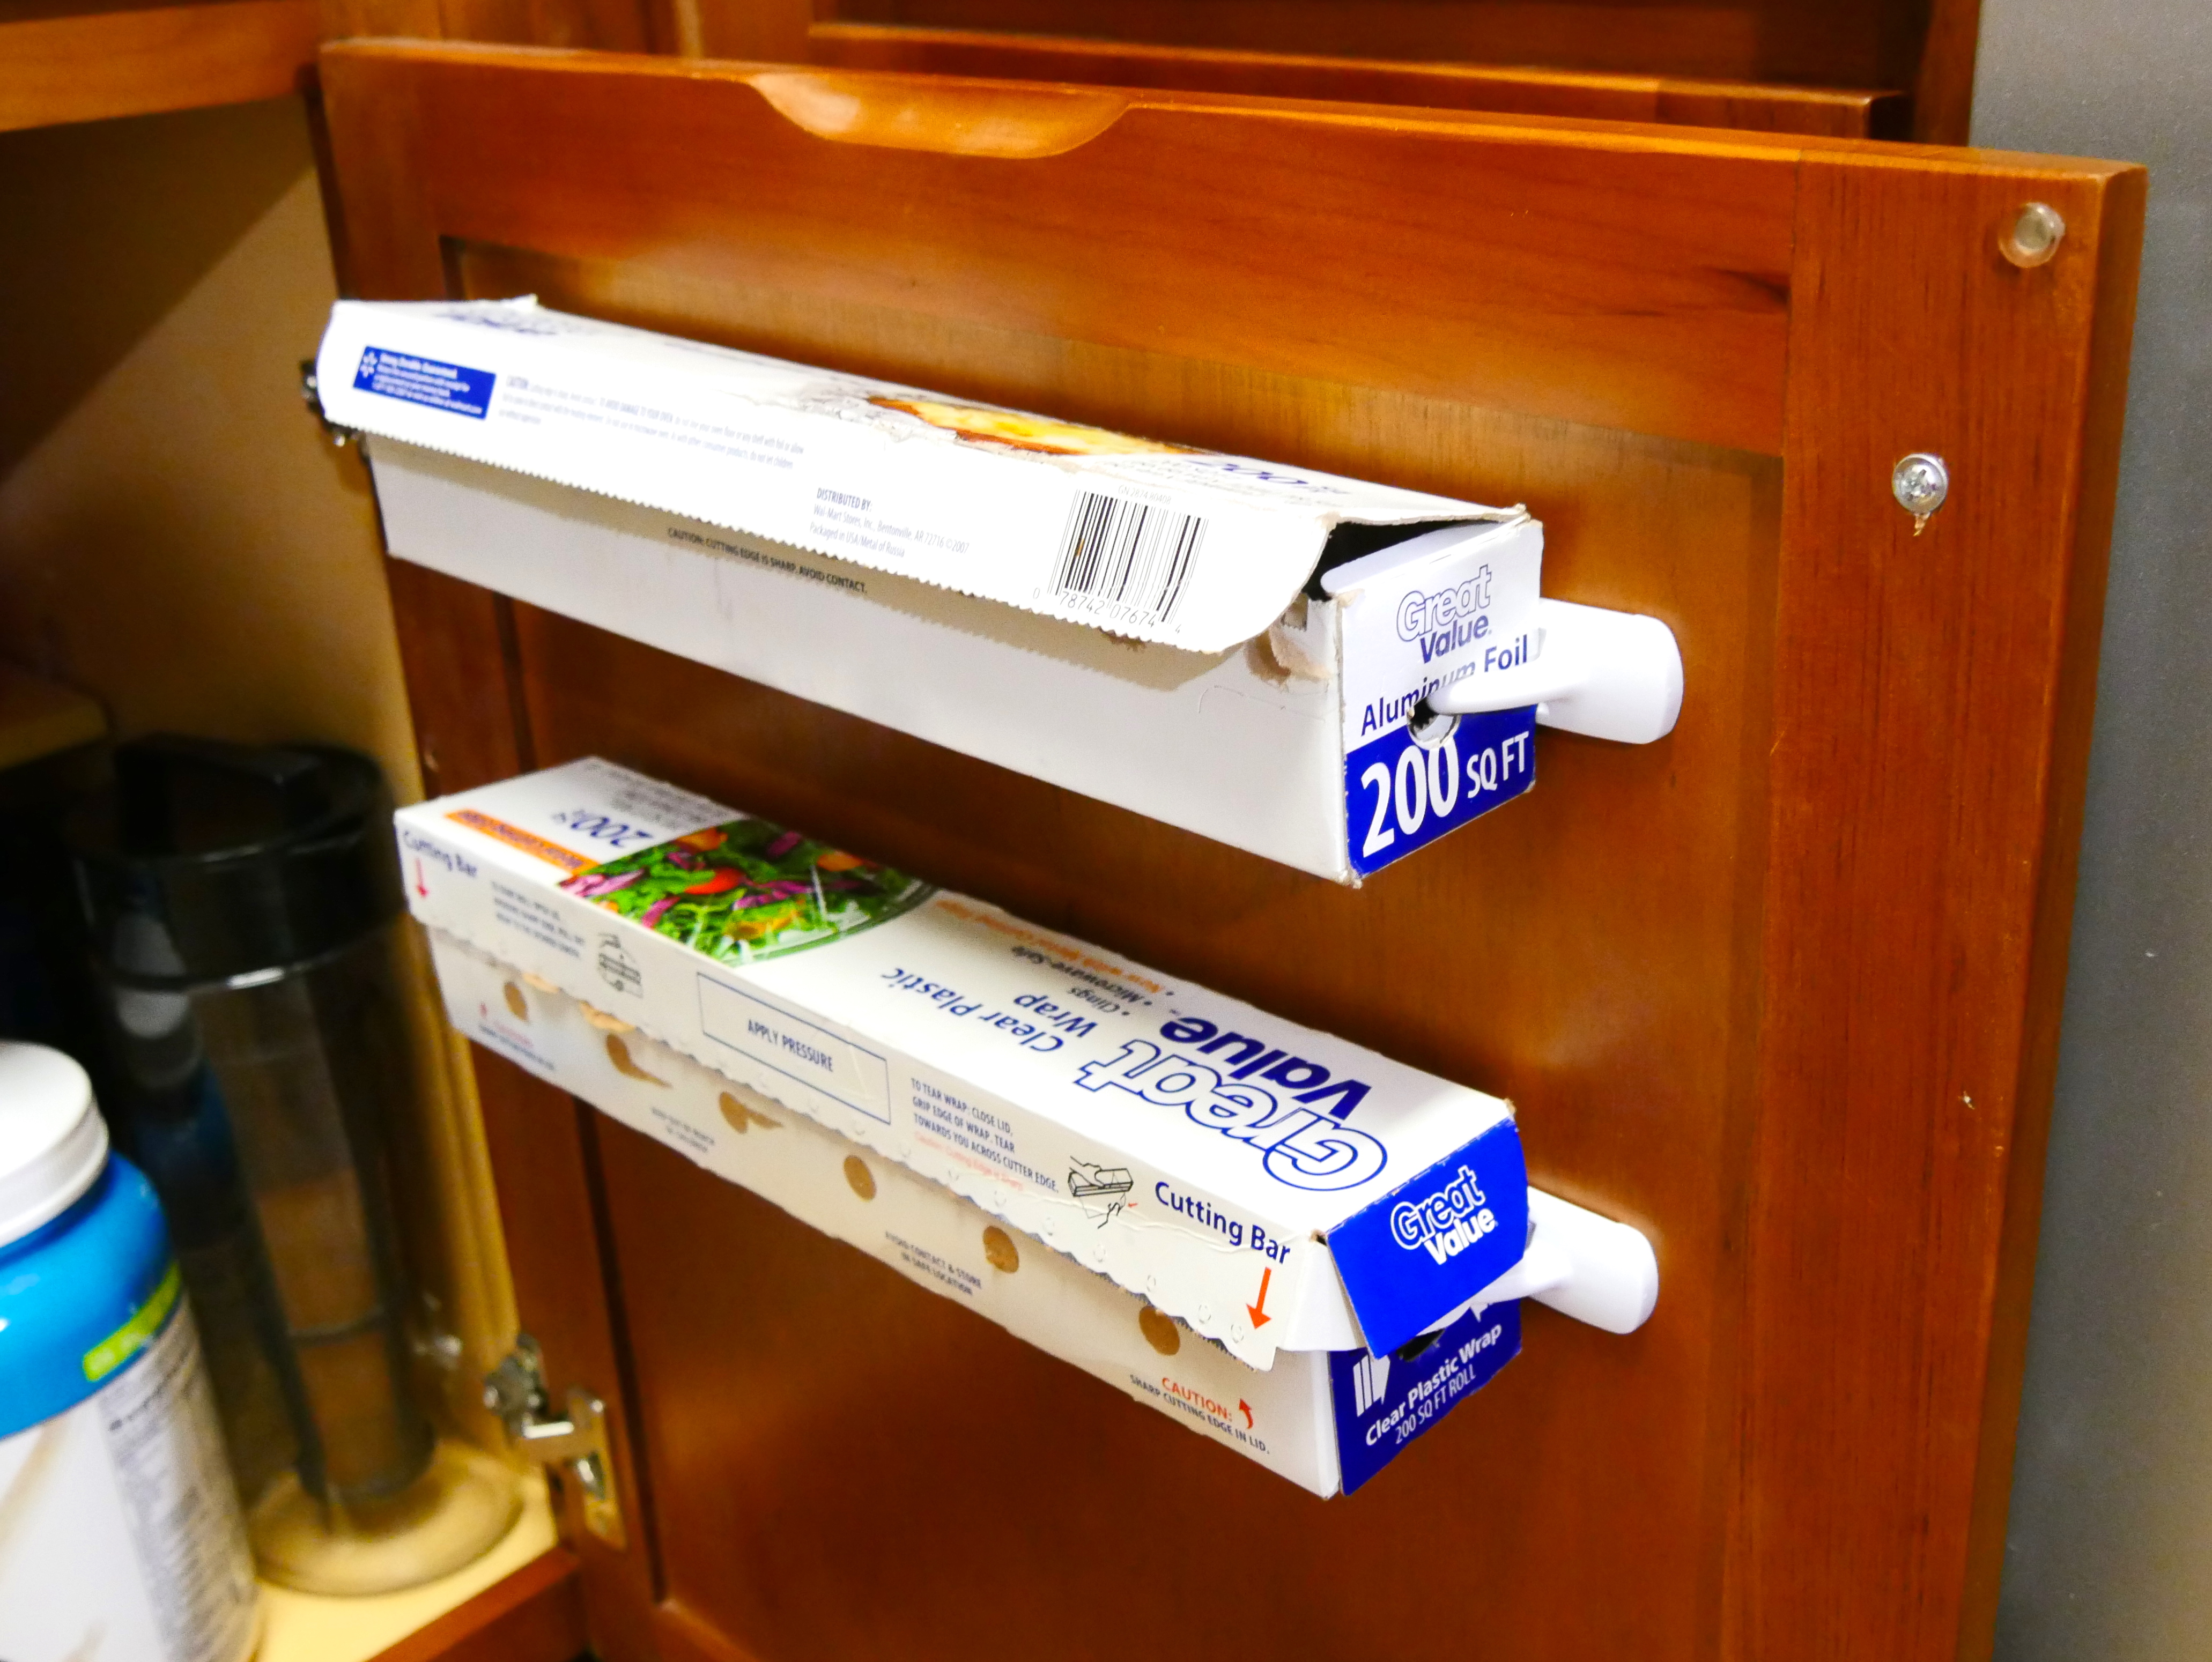 Hang aluminum foil and cling wrap inside a cabinet for easier access - CNET